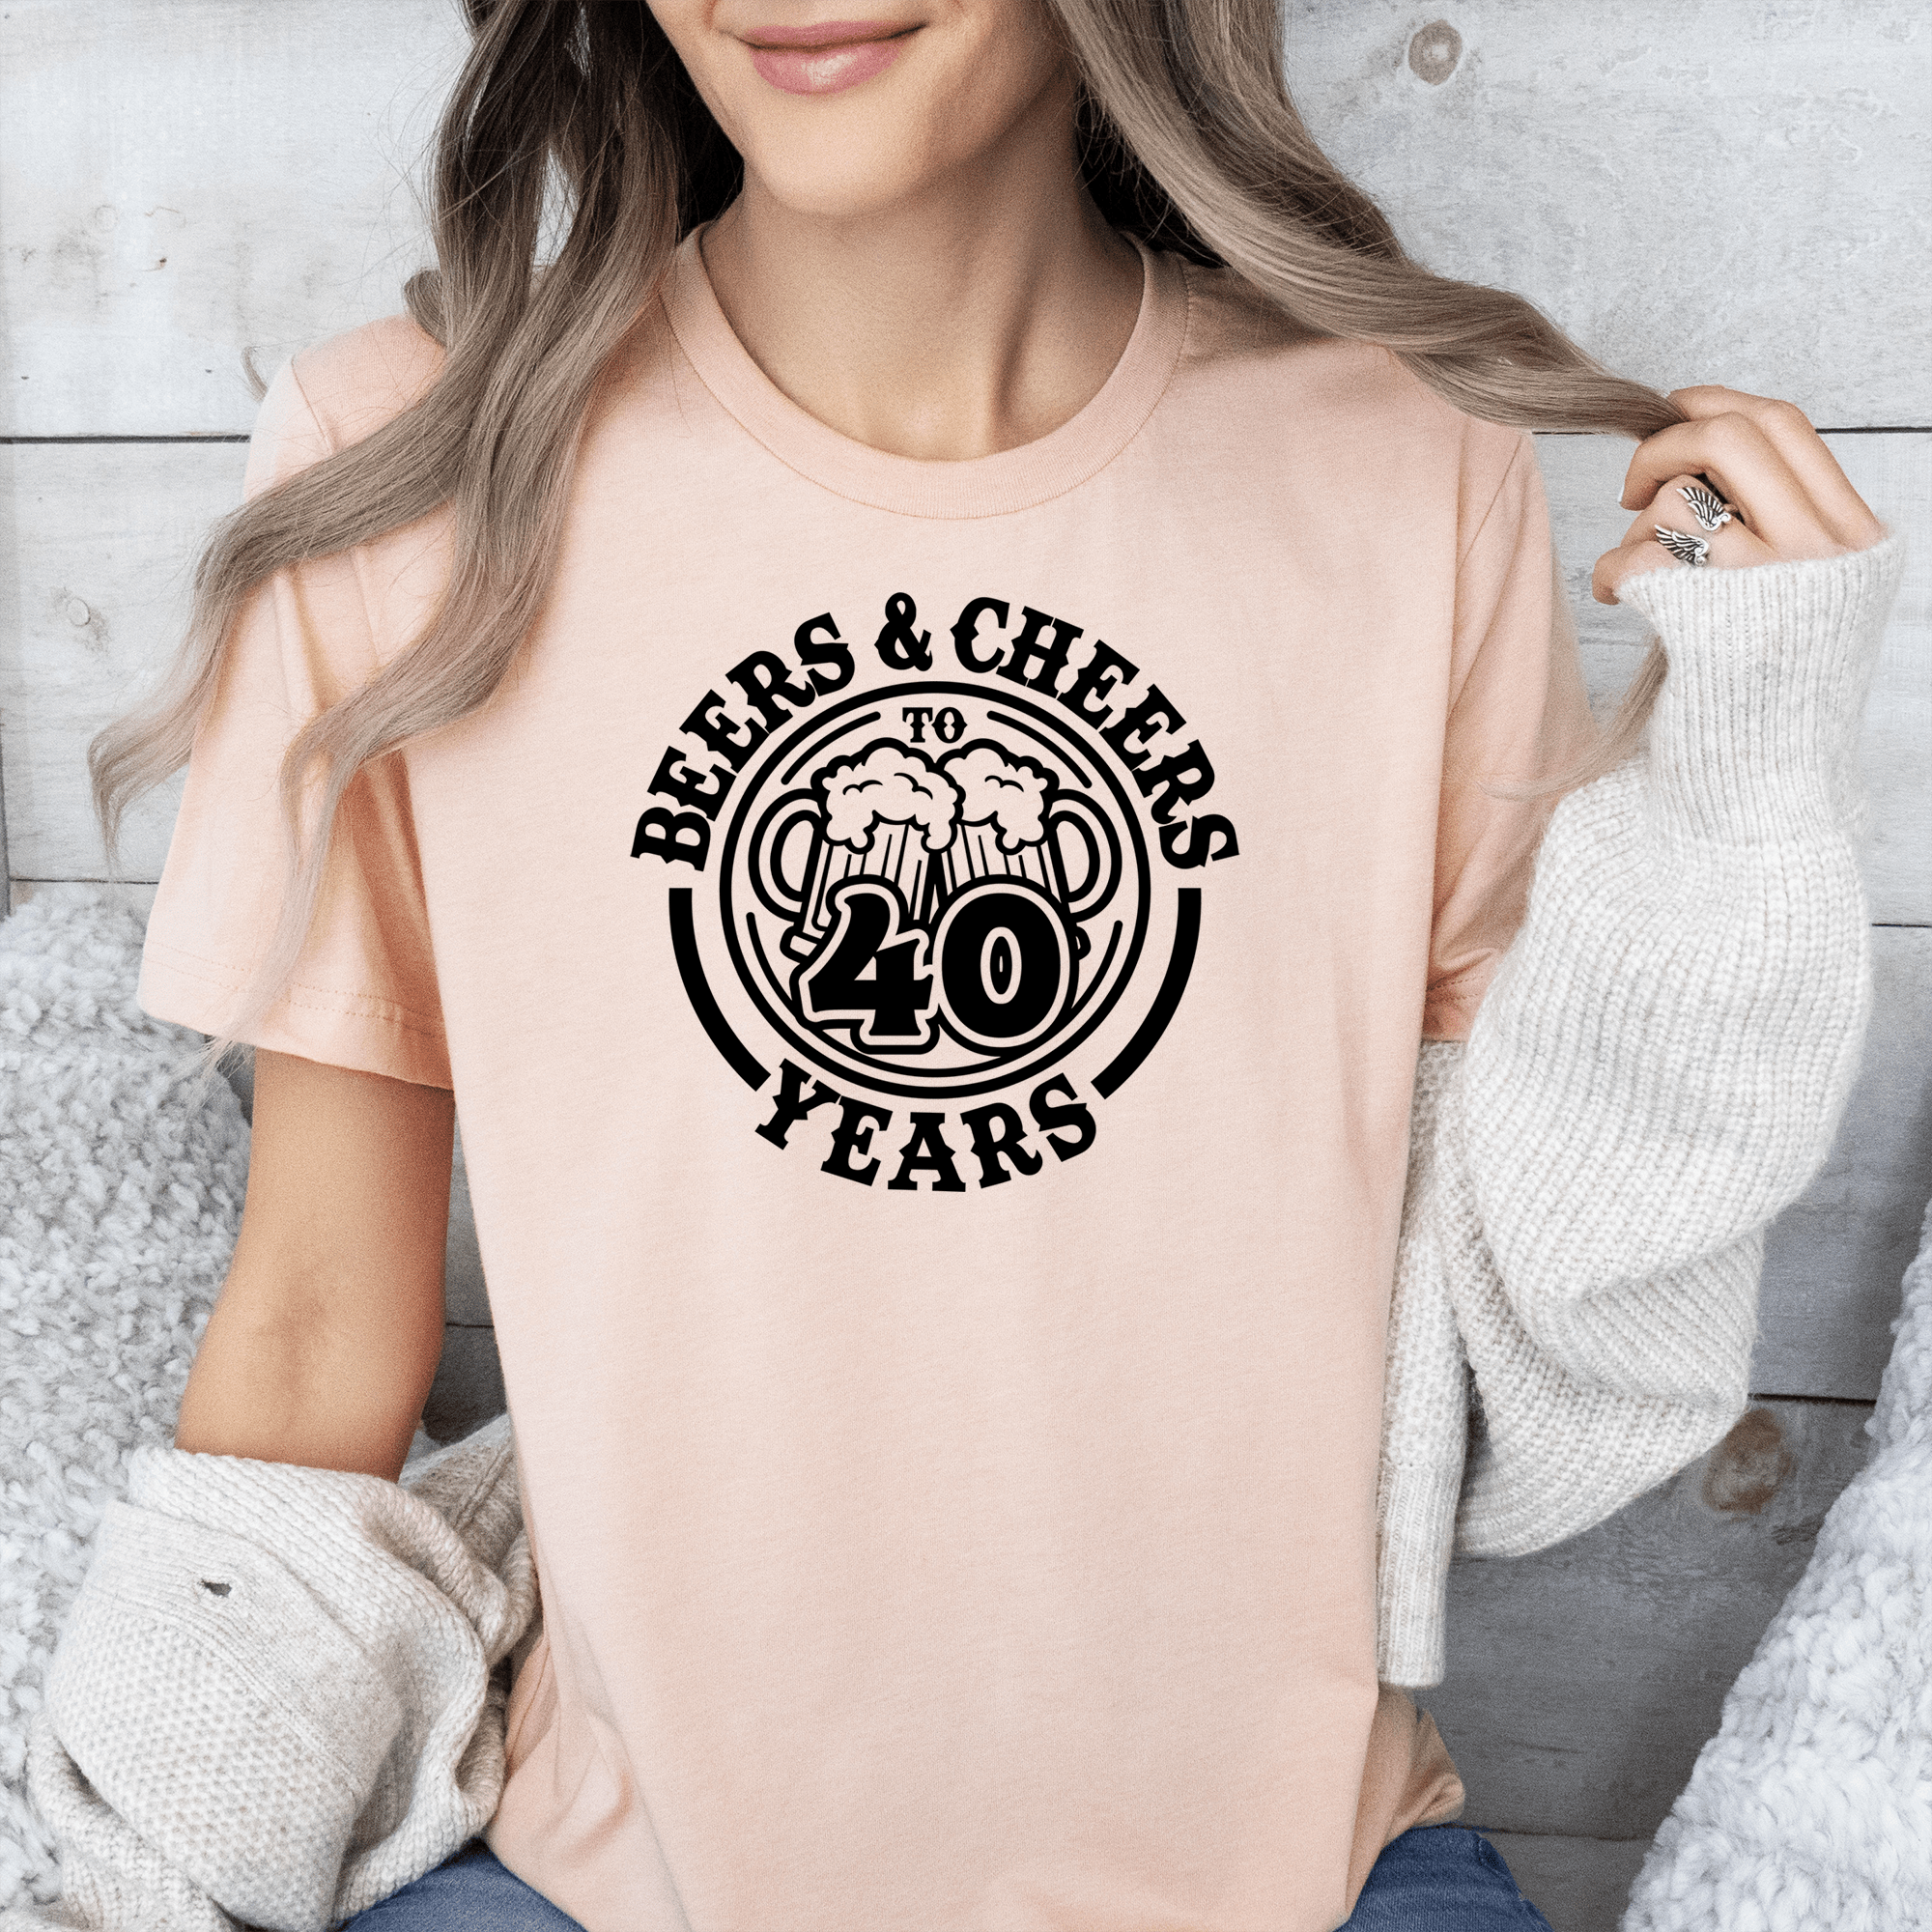 Womens Heather Peach T Shirt with Cheers-And-Beers-40 design